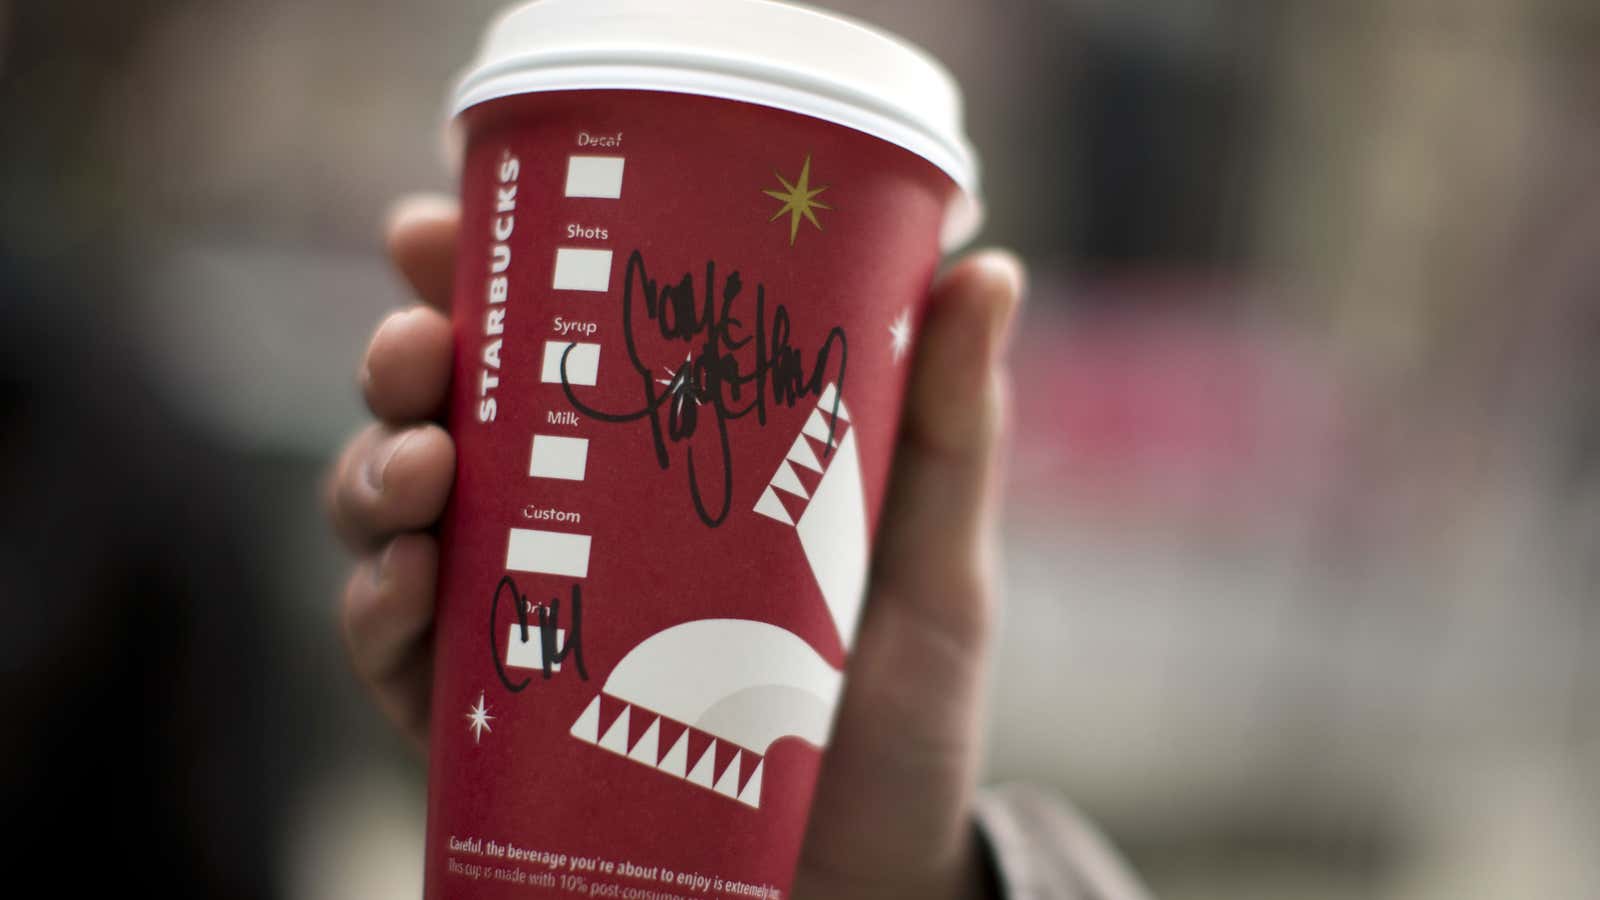 What “come together” means for multinationals like Starbucks? Lower taxes.